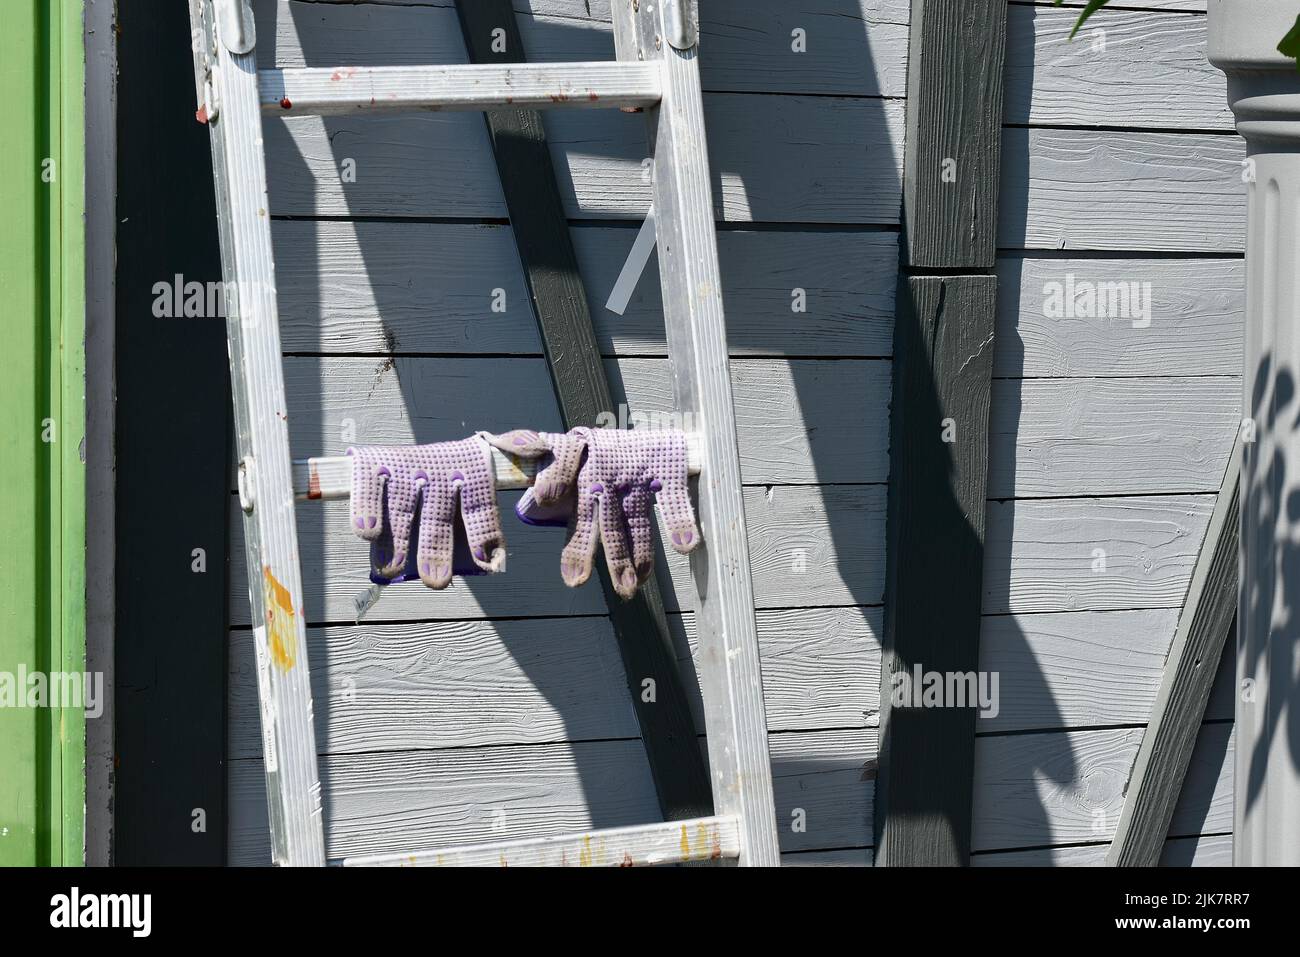 hand shoes on a ladder, shadow casting on a grey wooden door, background in the garden Stock Photo